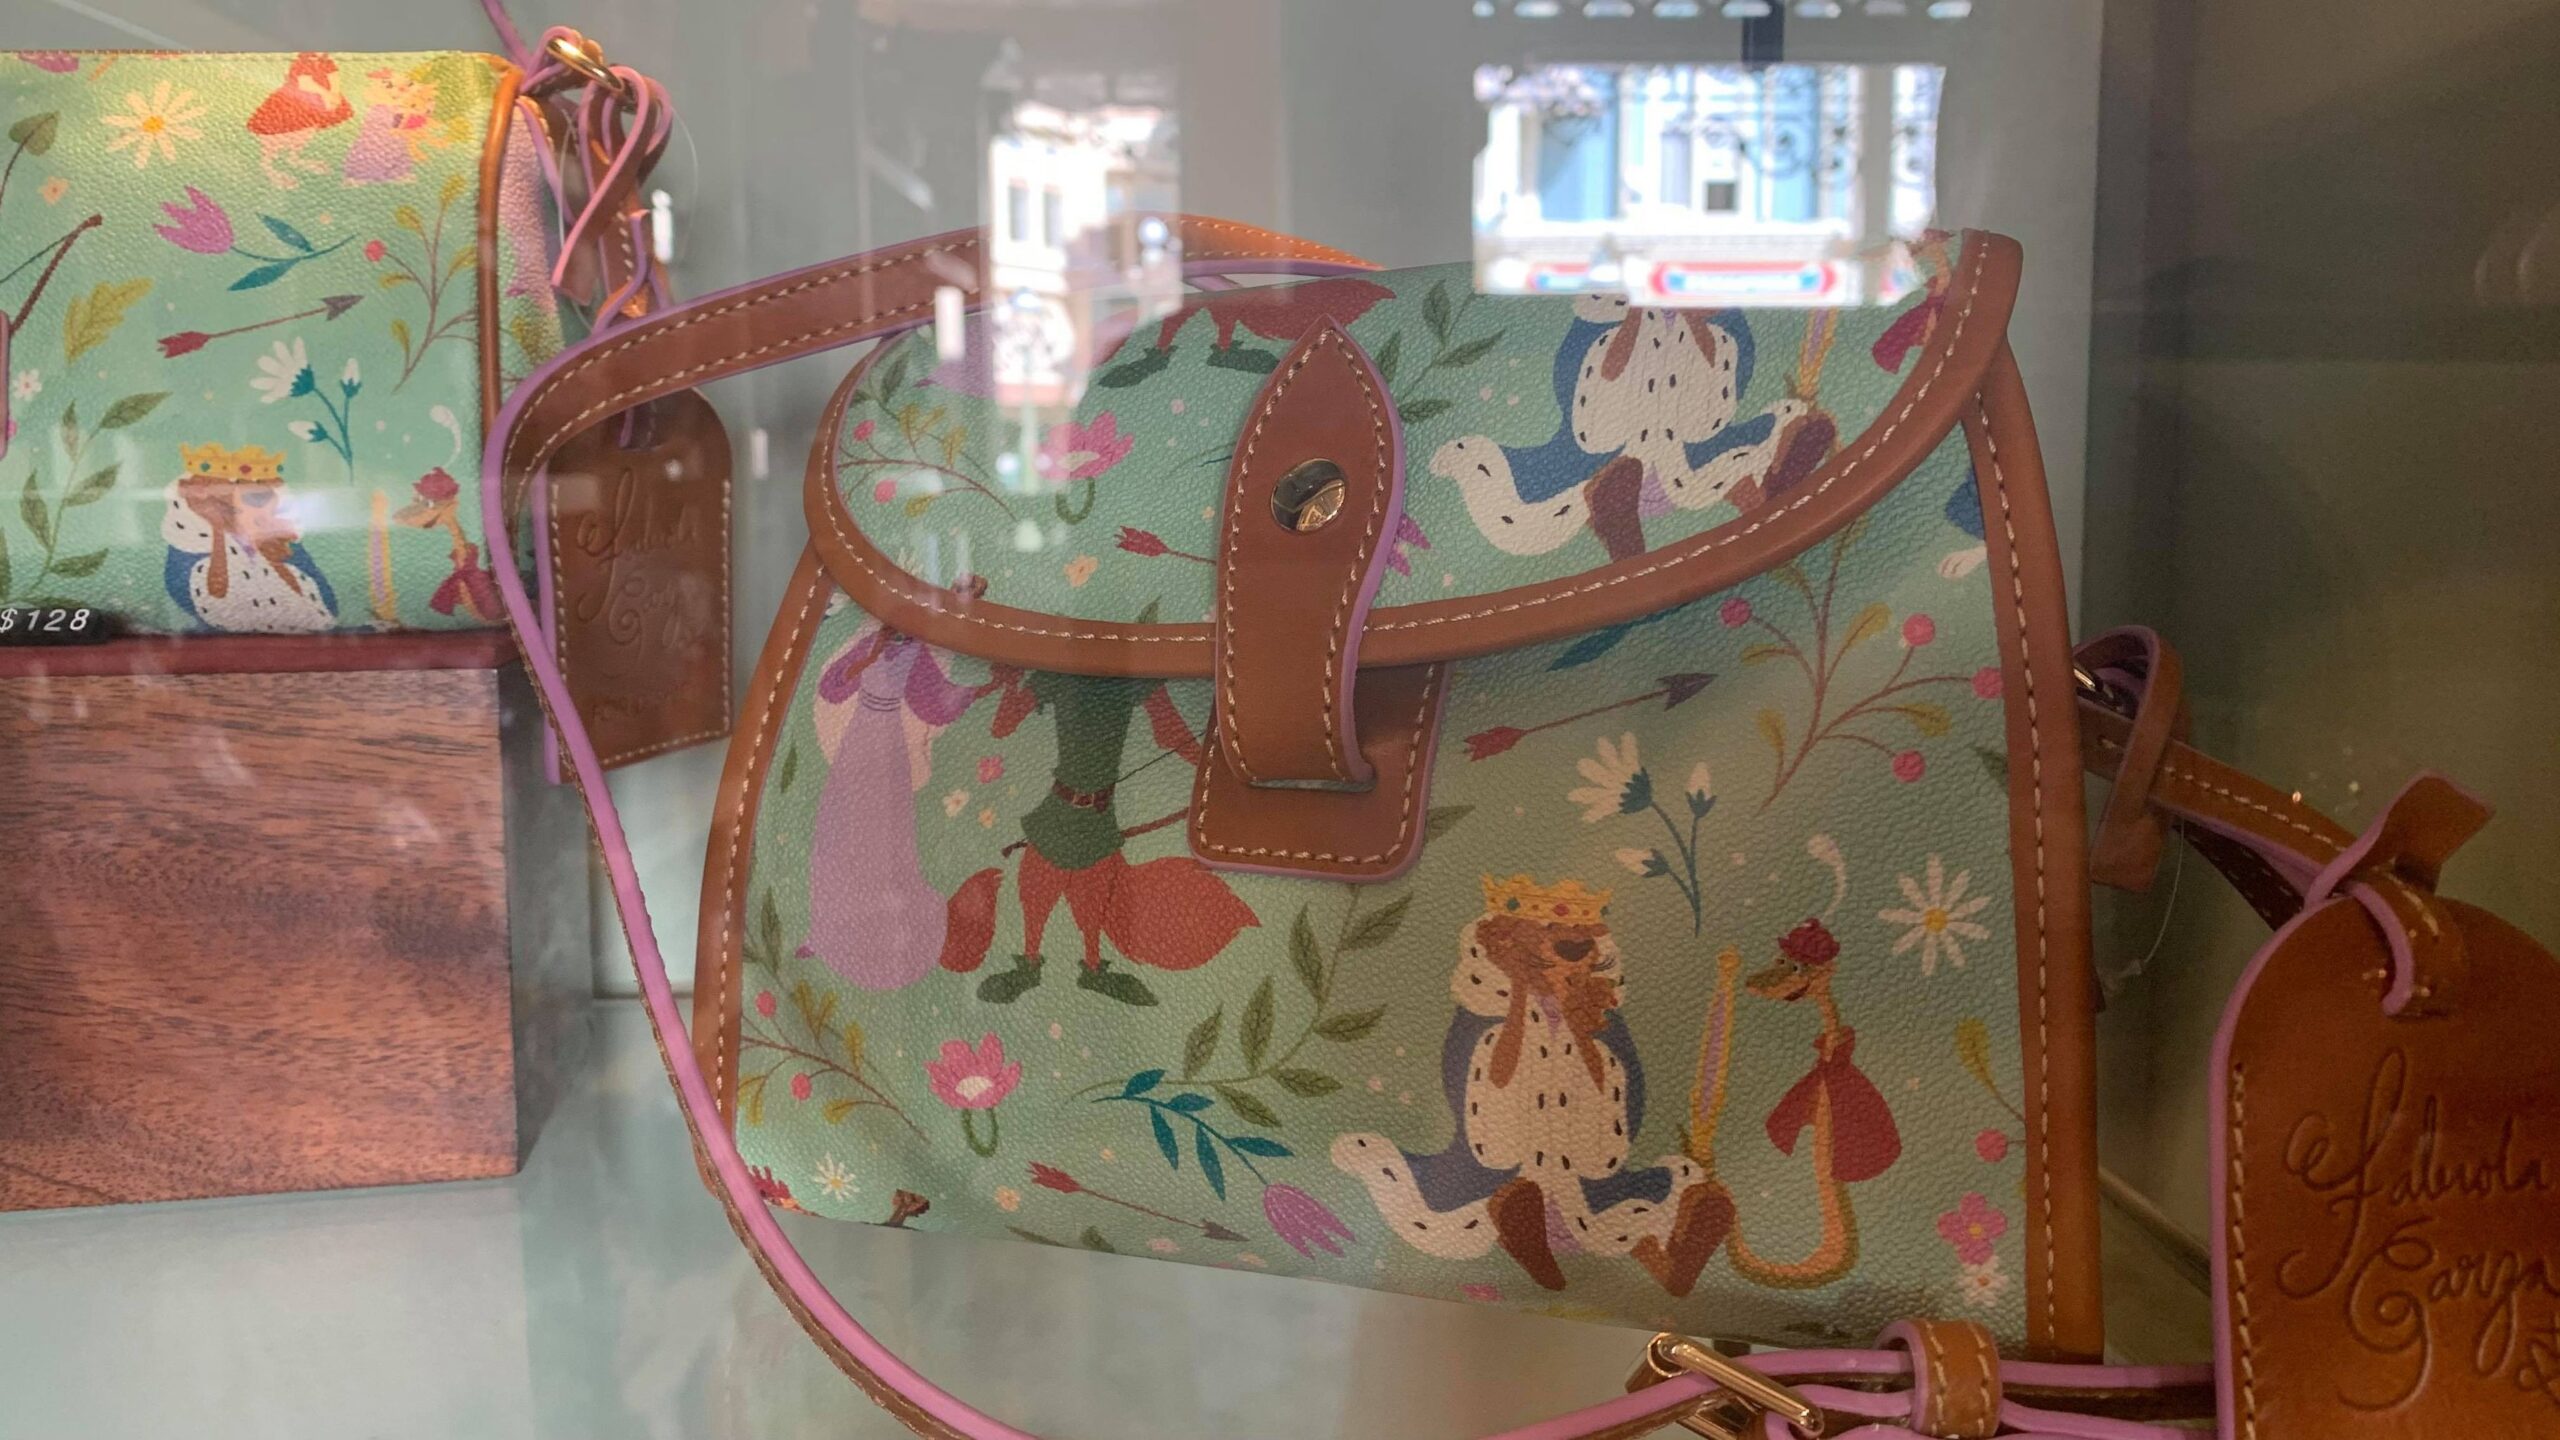 New Robin Hood Dooney And Bourke Collection